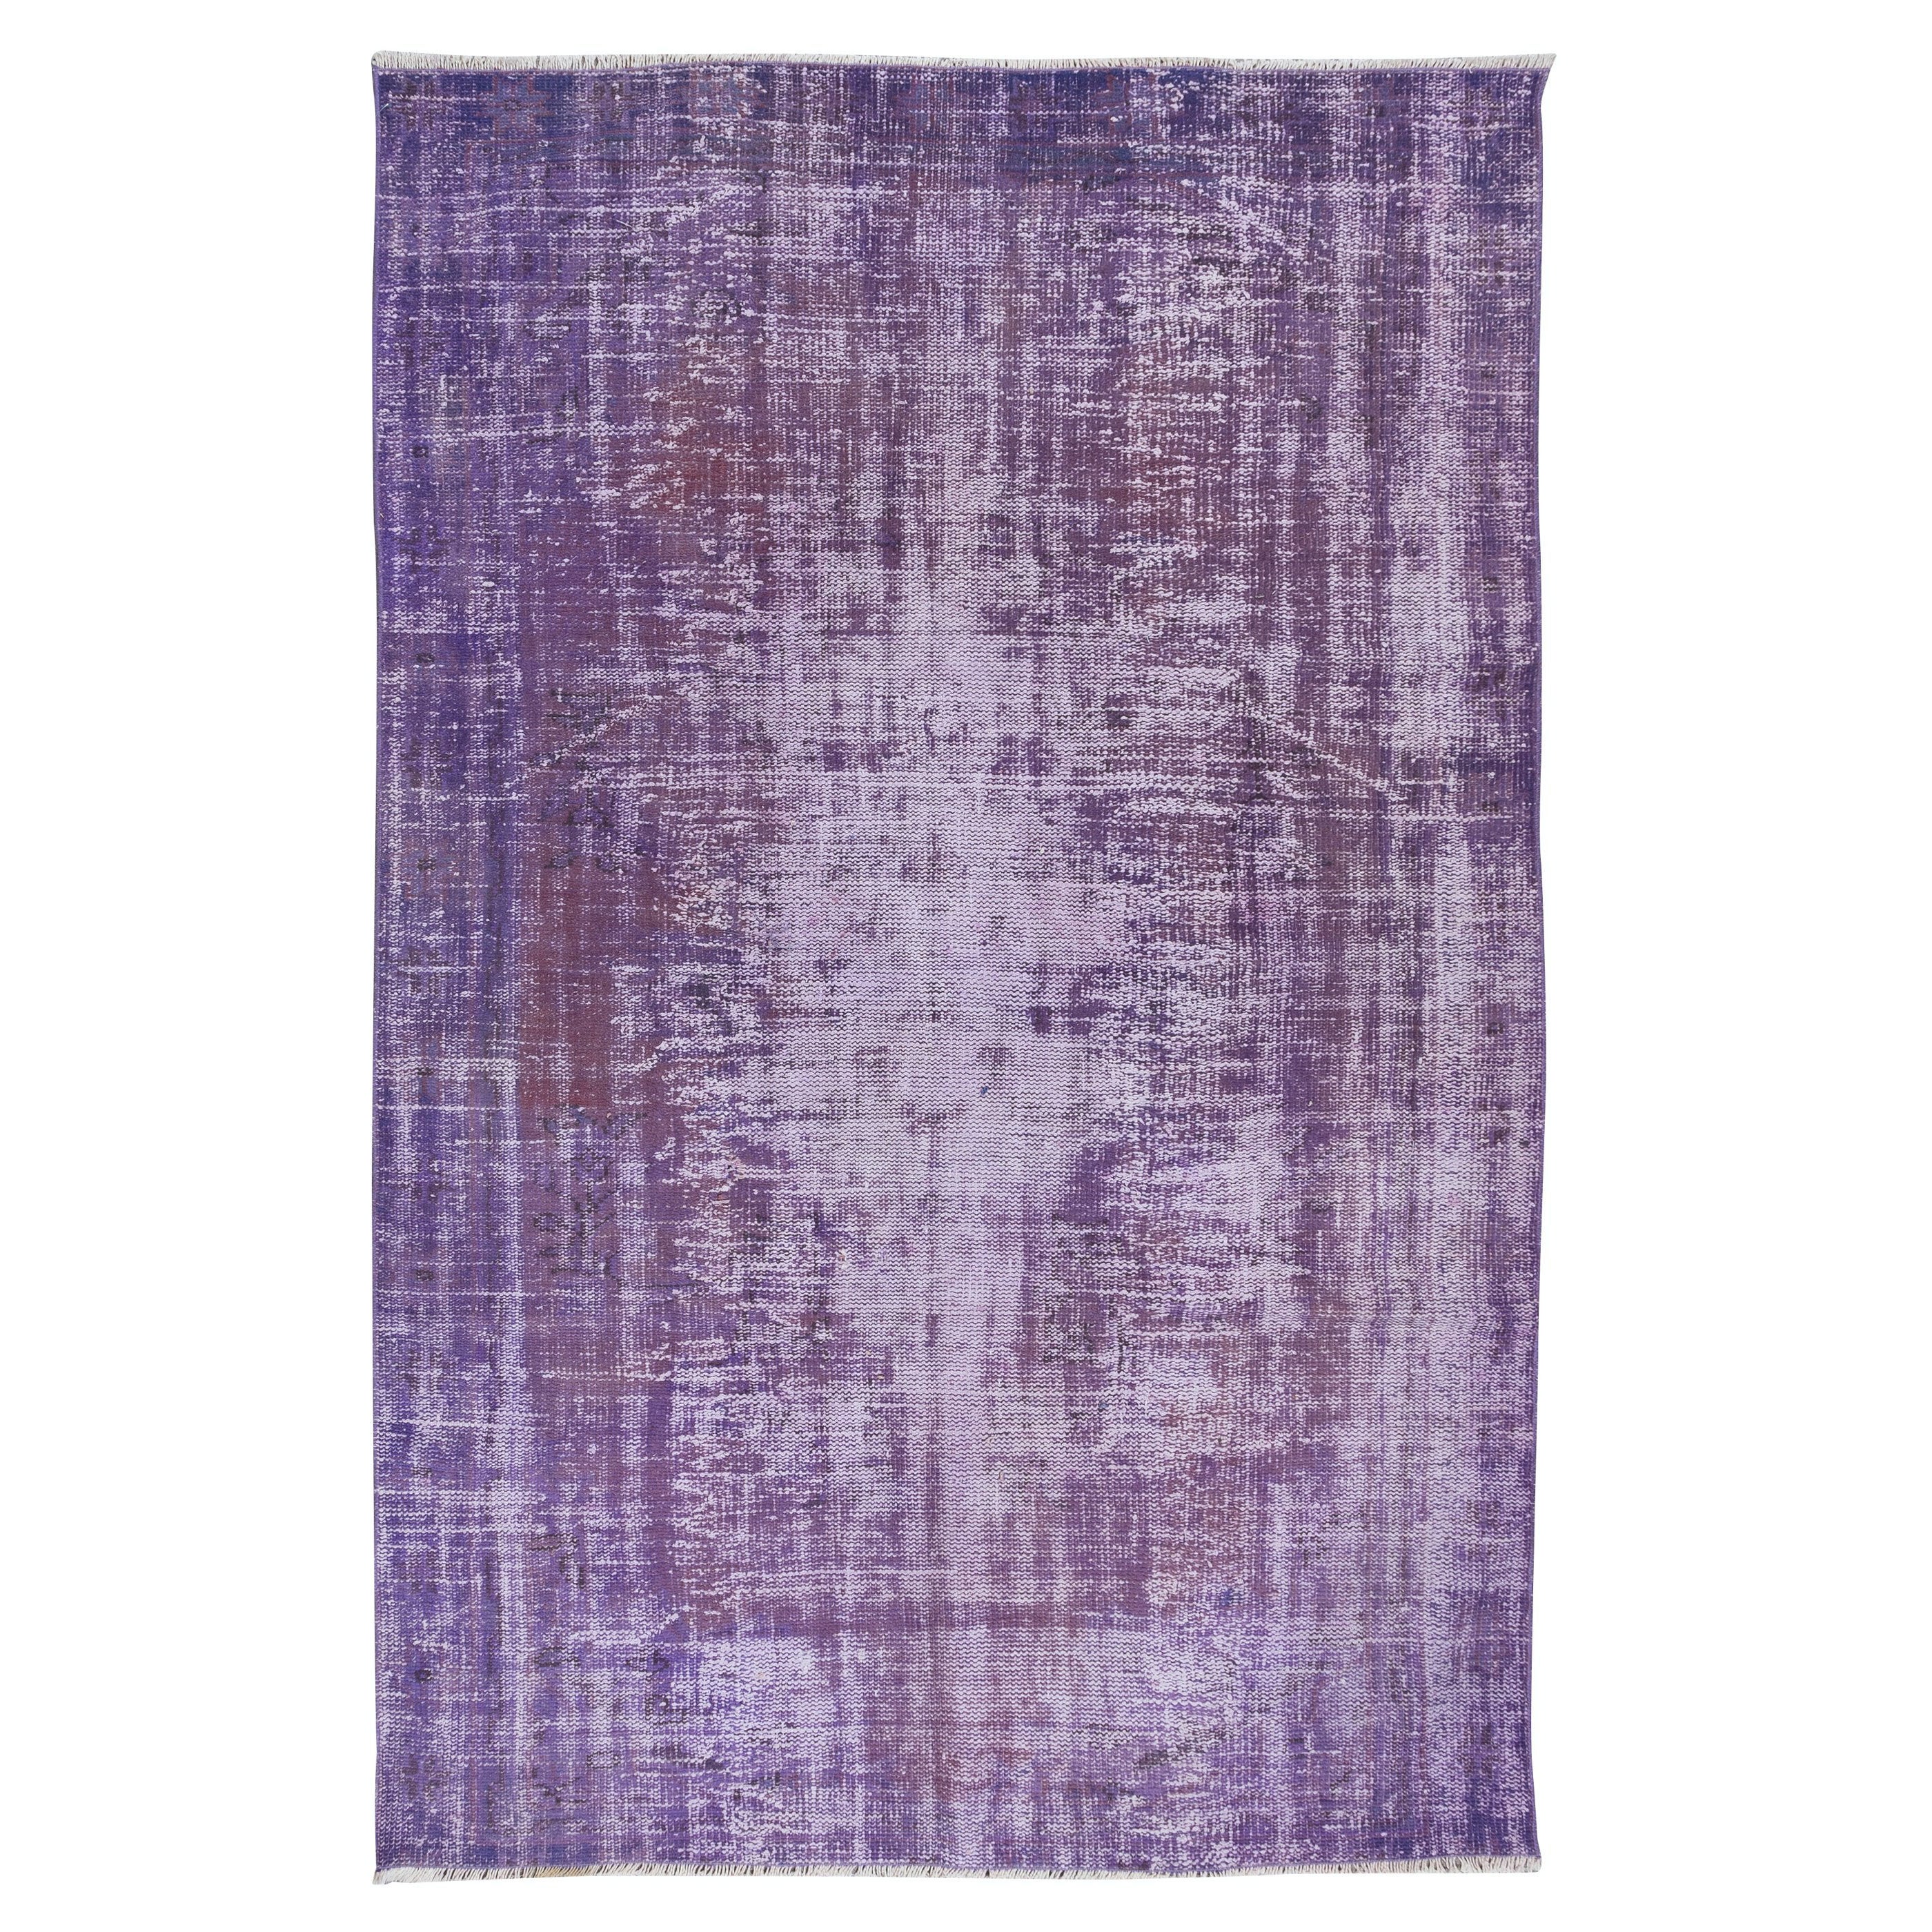 5.5x8.4 Ft Rustic Handmade Distressed Turkish Sparta Area Rug in Orchid Purple For Sale